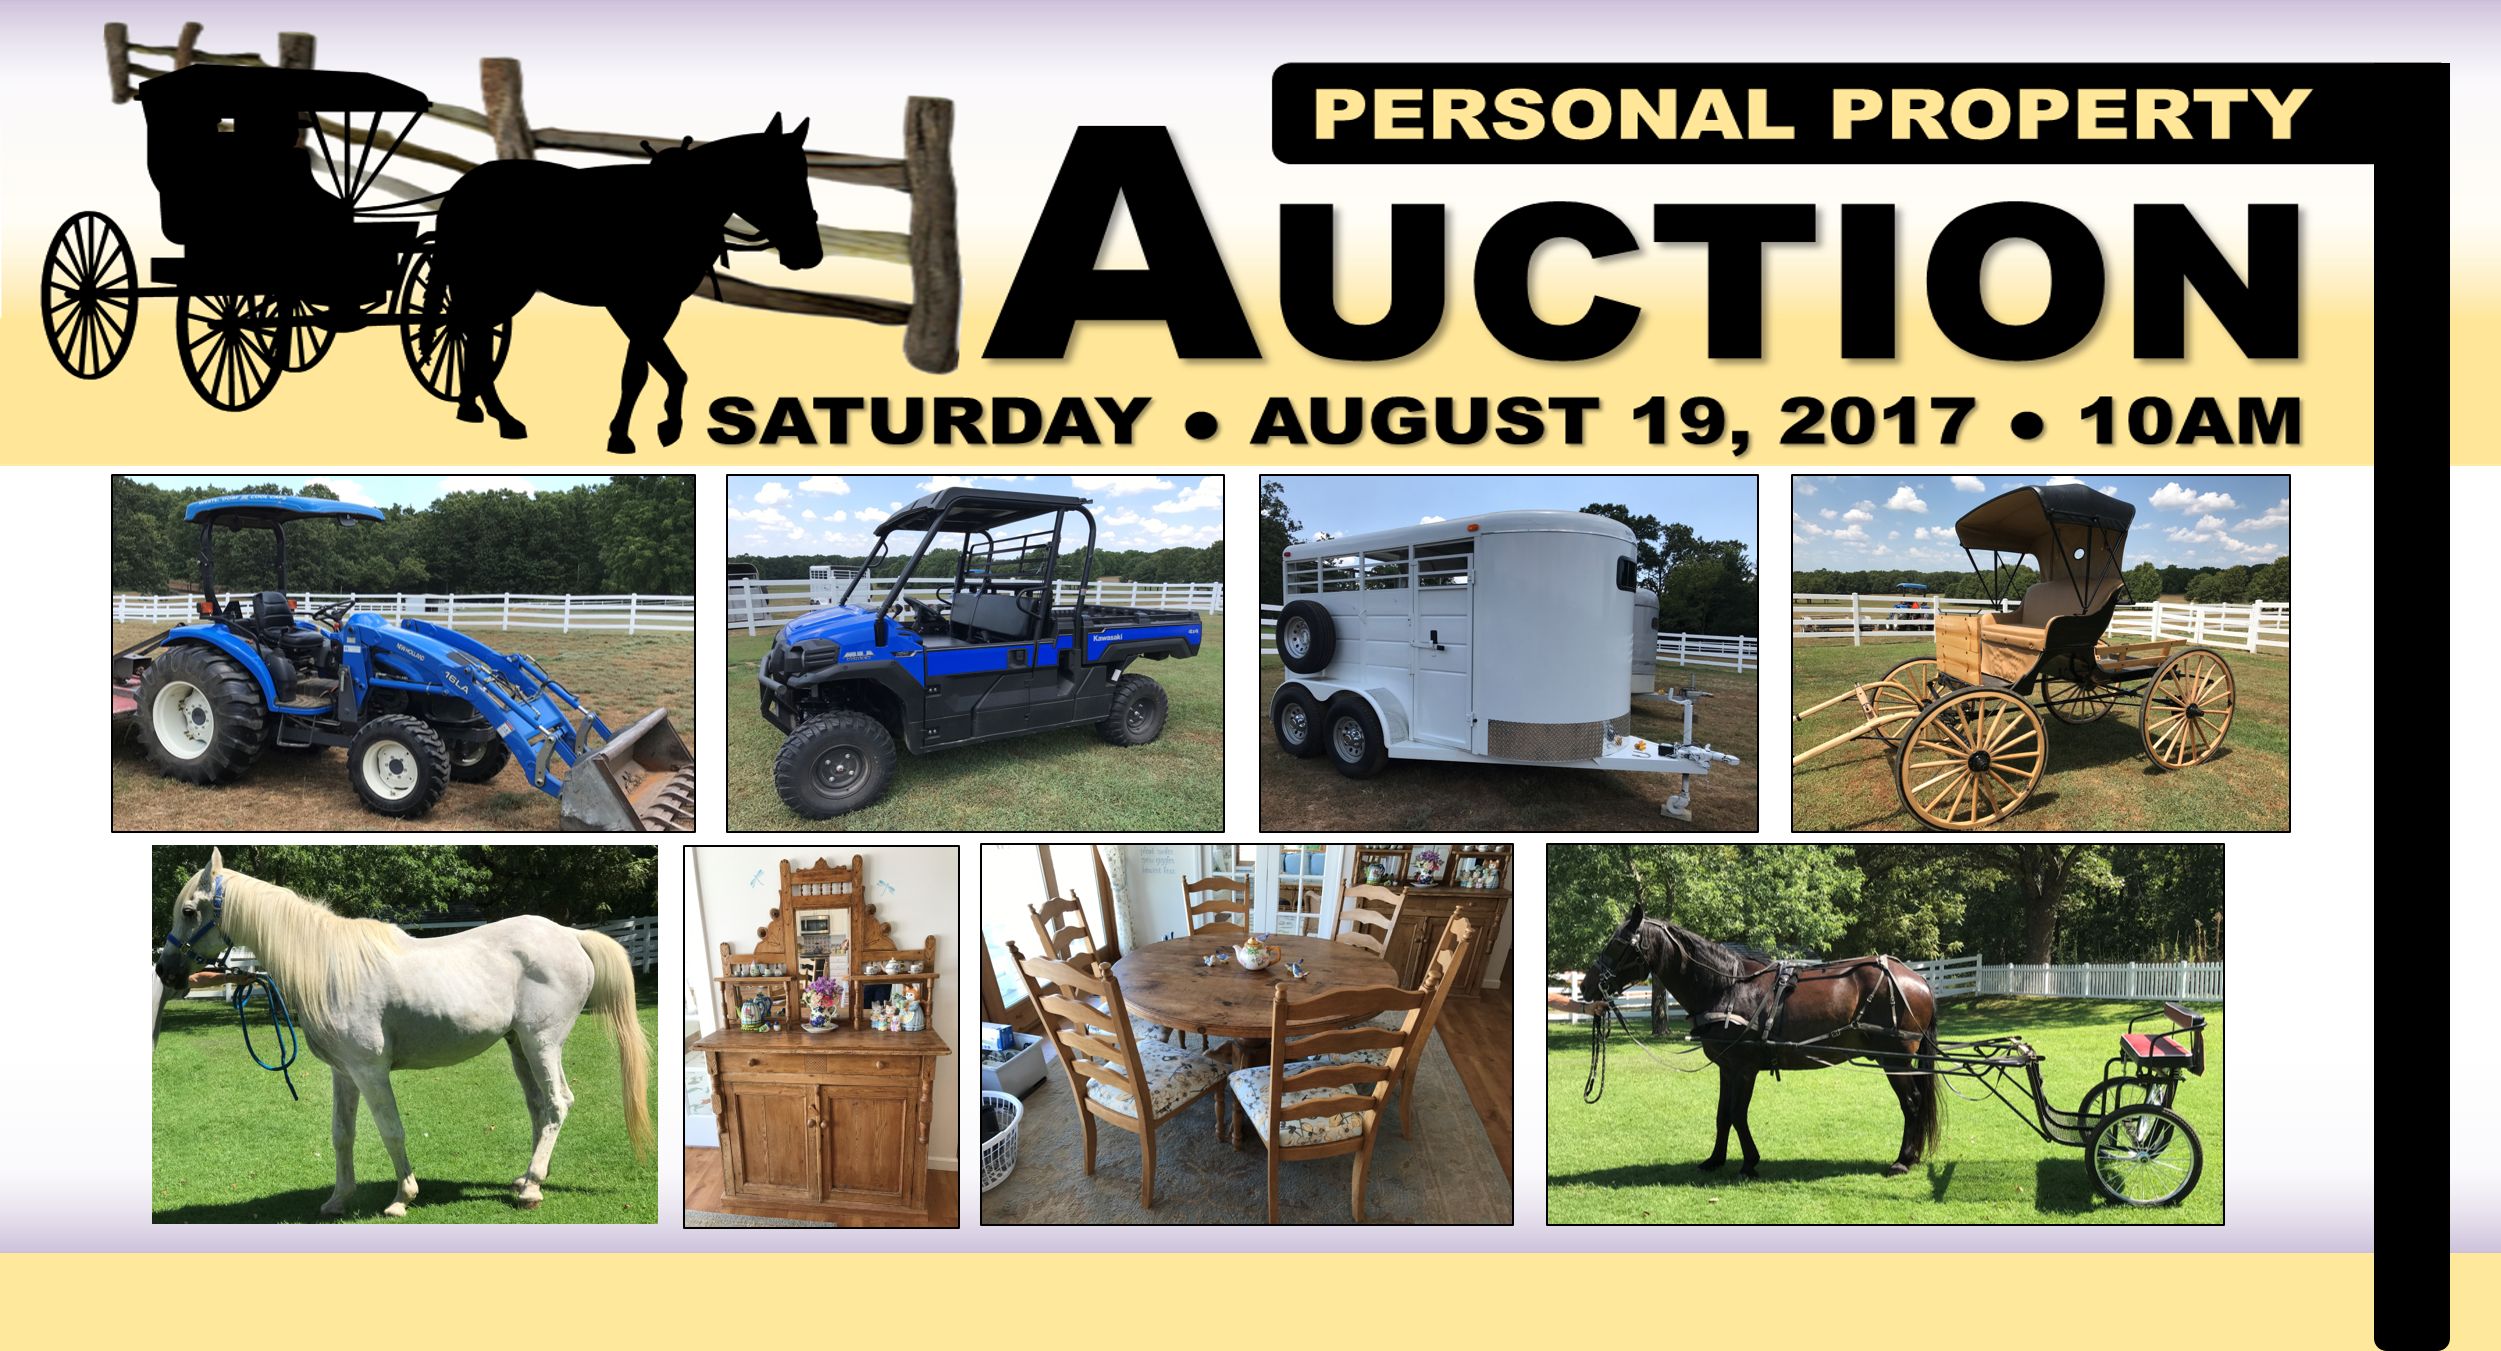 PERSONAL PROPERTY AUCTION